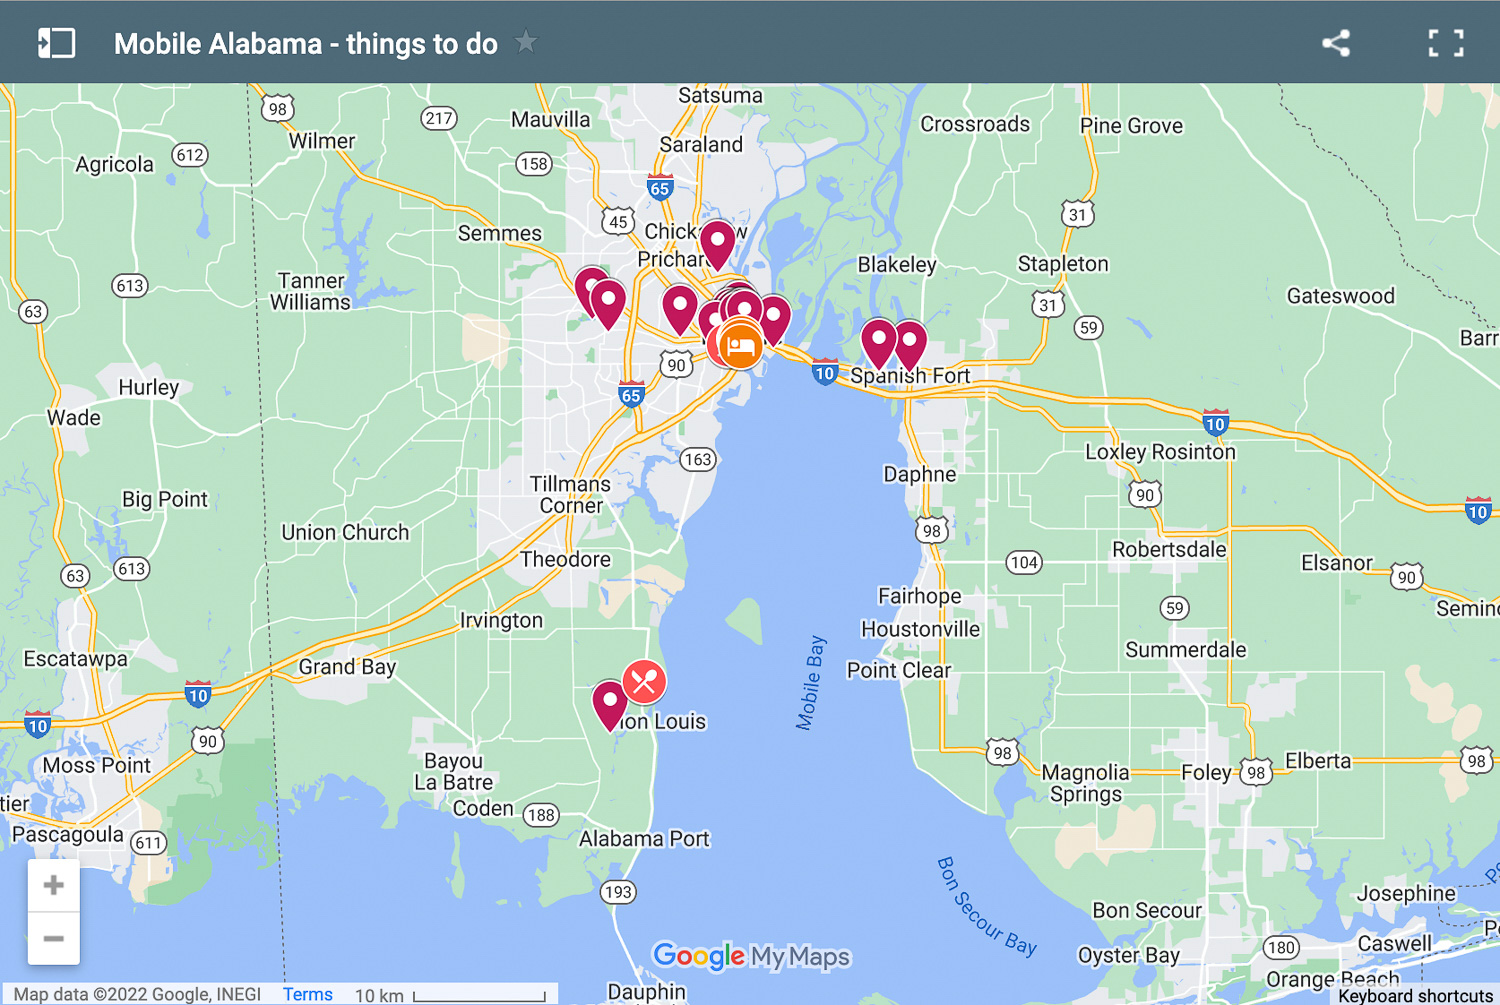 Map of things to do in Mobile Alabama